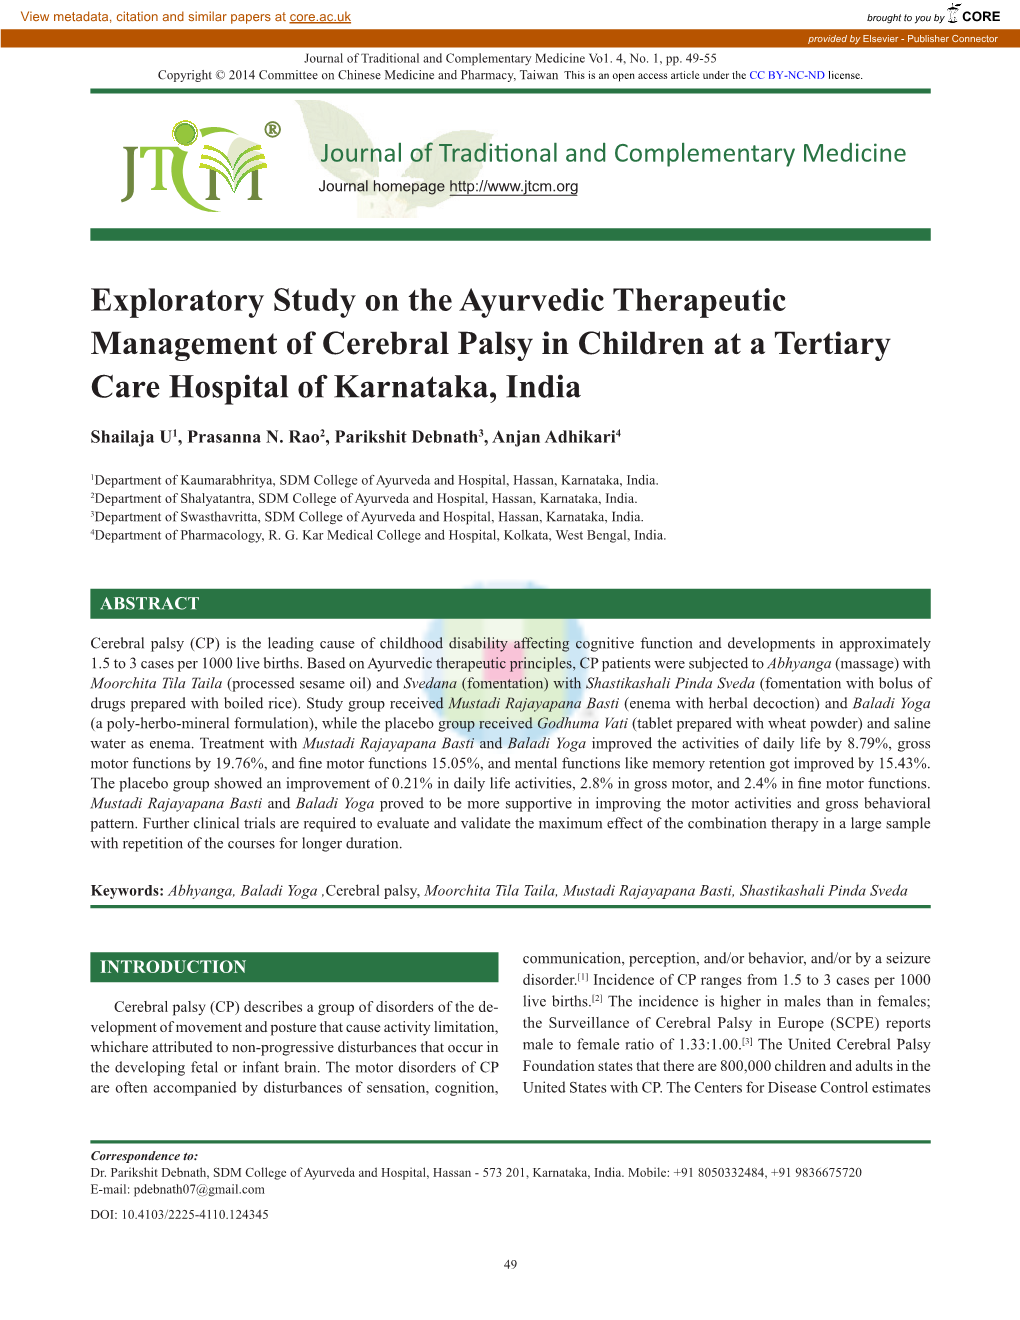 Exploratory Study on the Ayurvedic Therapeutic Management of Cerebral Palsy in Children at a Tertiary Care Hospital of Karnataka, India